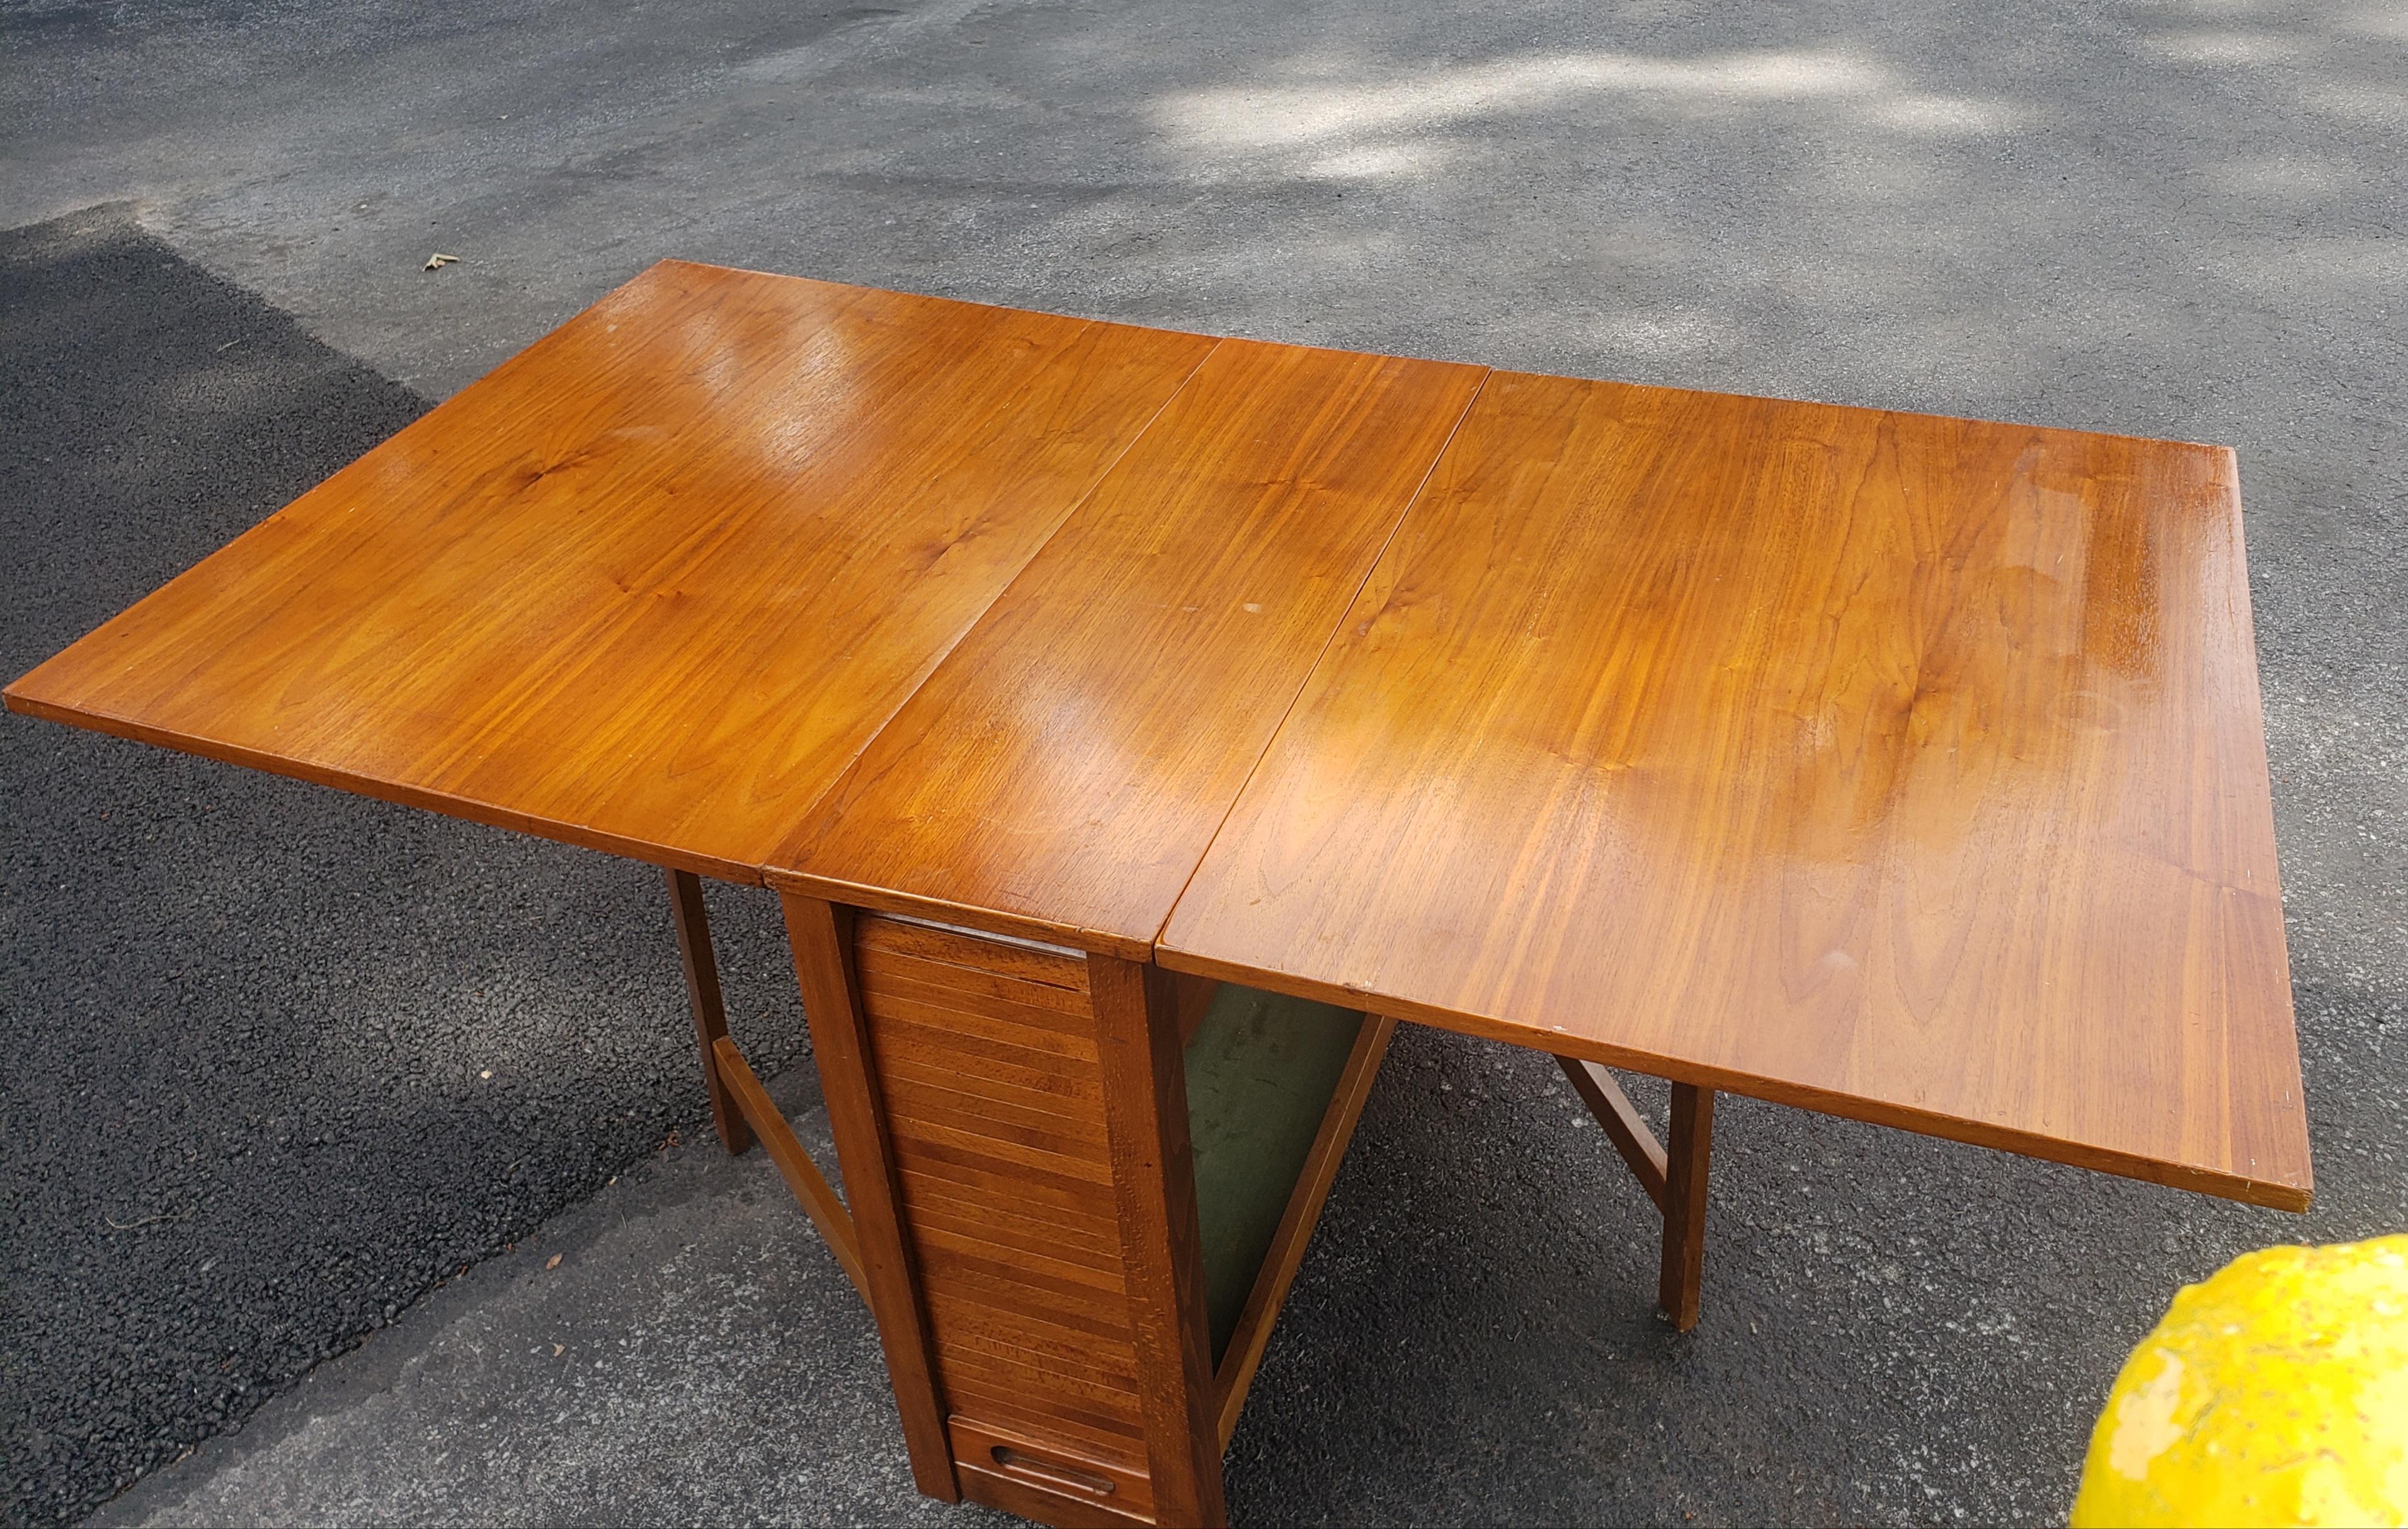 Adam Style Mid-Century Danish Modern Teak Drop-Leaf Dining Table with Storage on Rollers For Sale